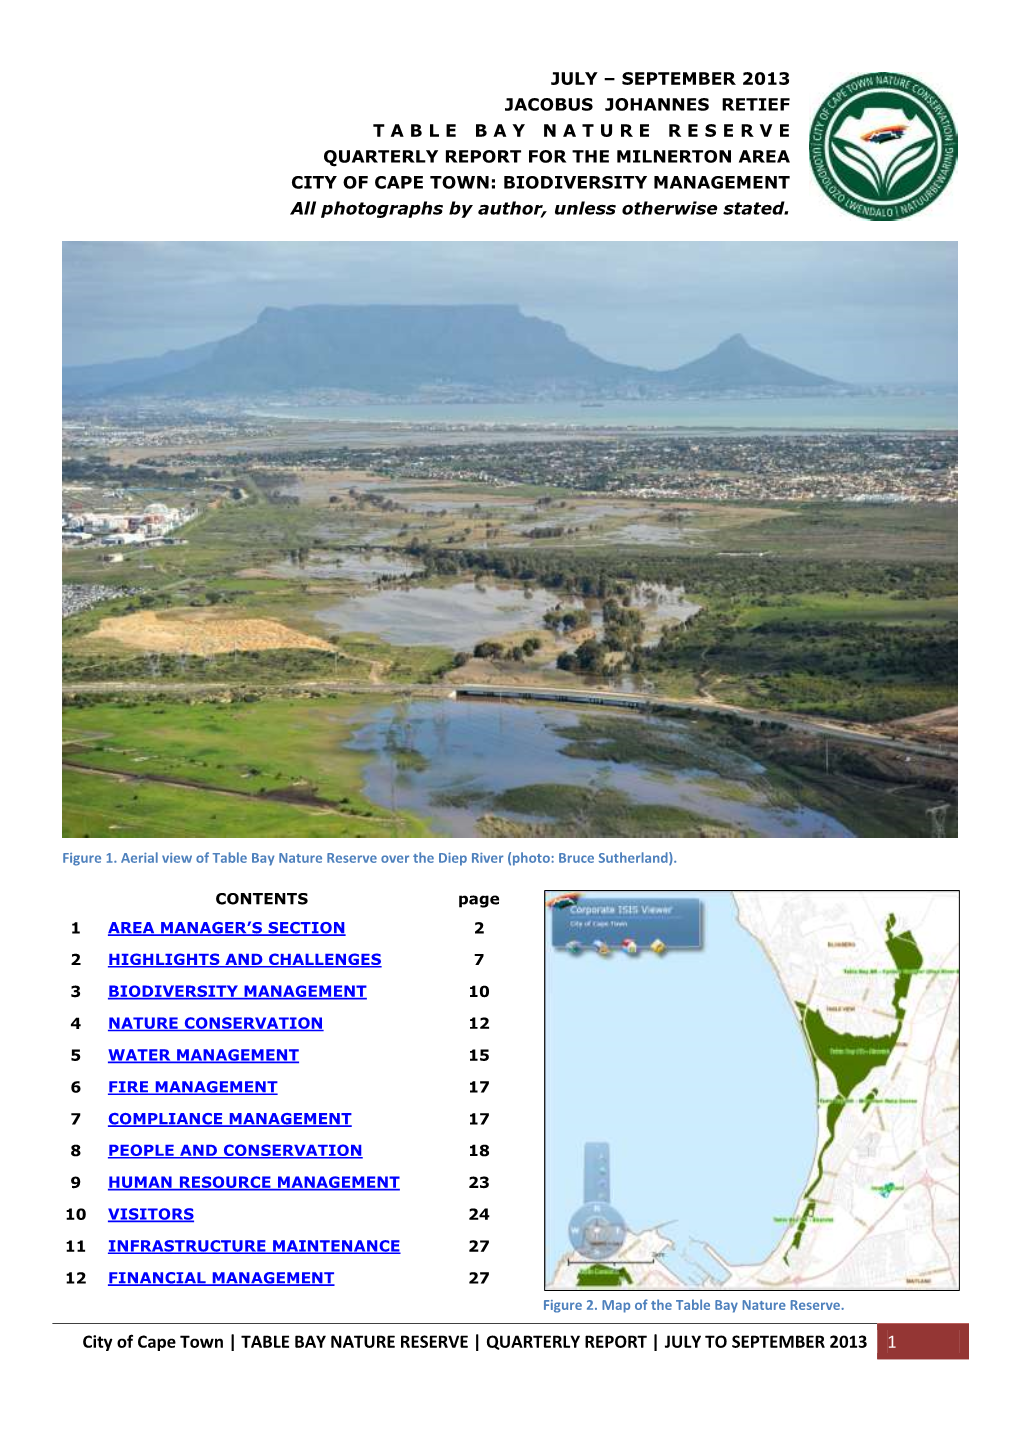 City of Cape Town | TABLE BAY NATURE RESERVE | QUARTERLY REPORT | JULY to SEPTEMBER 2013 1